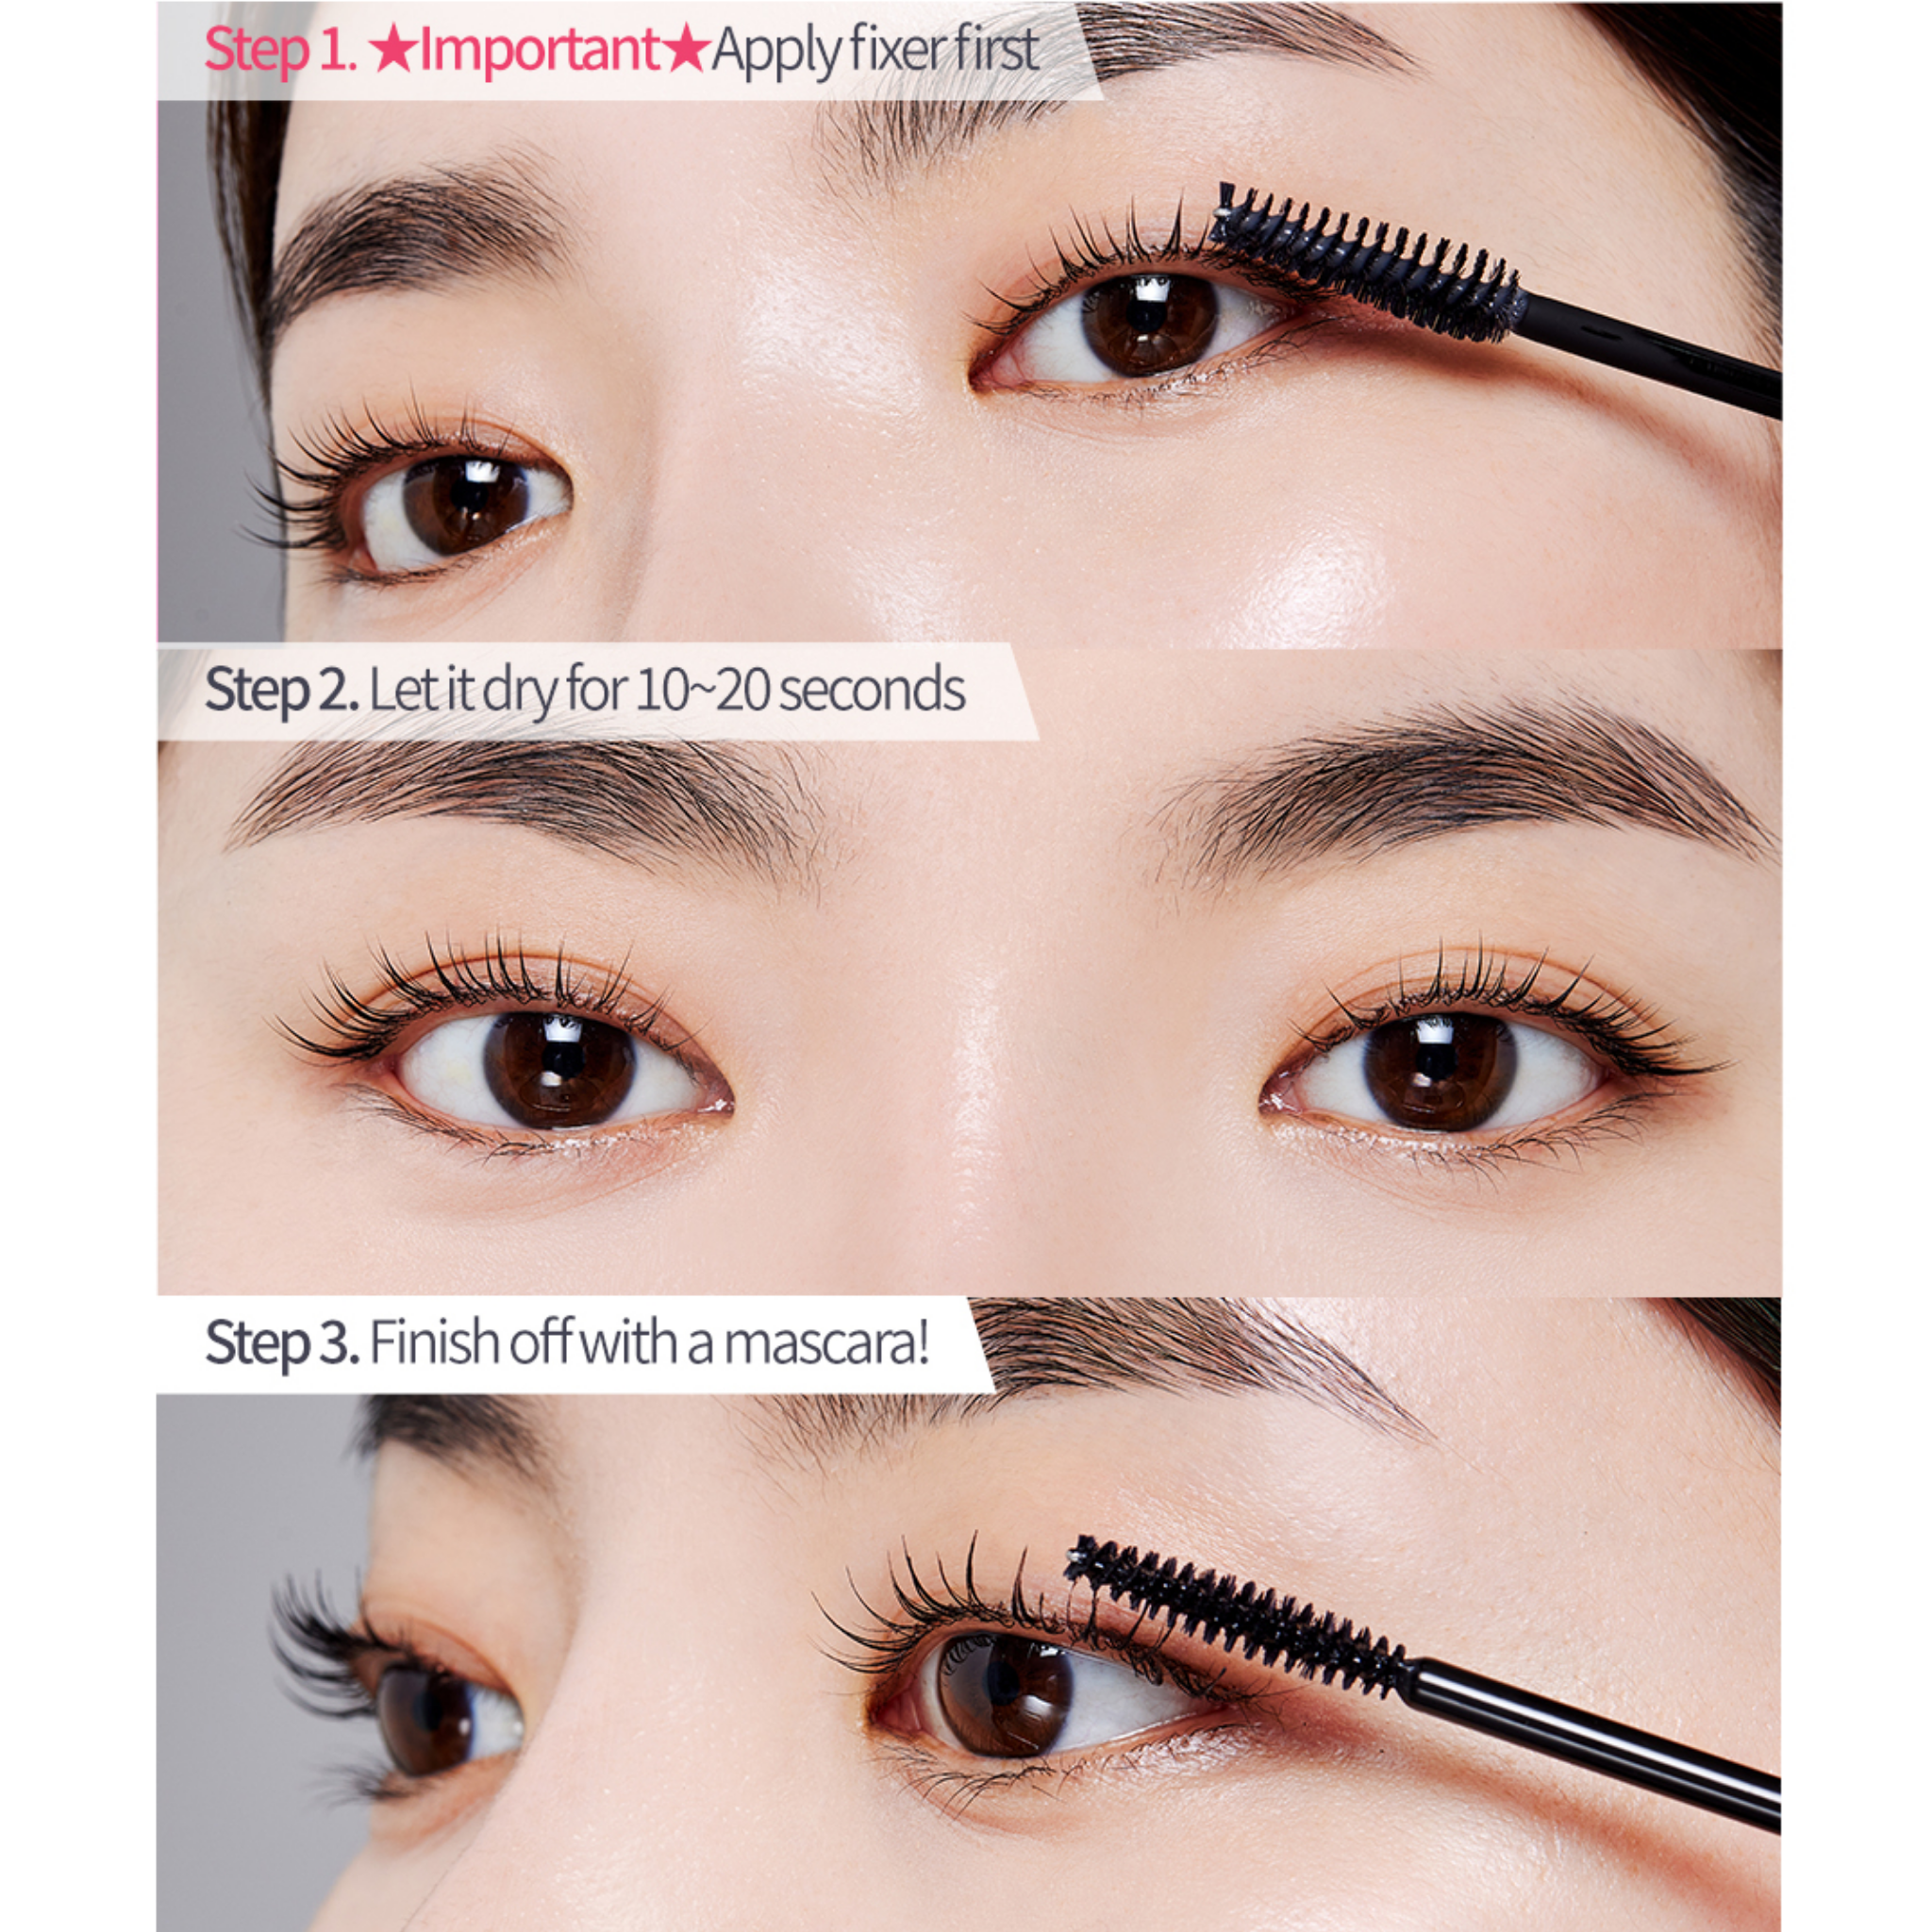 ETUDE HOUSE Dr. Mascara Fixer For Super Long Lash (6ml) how to use